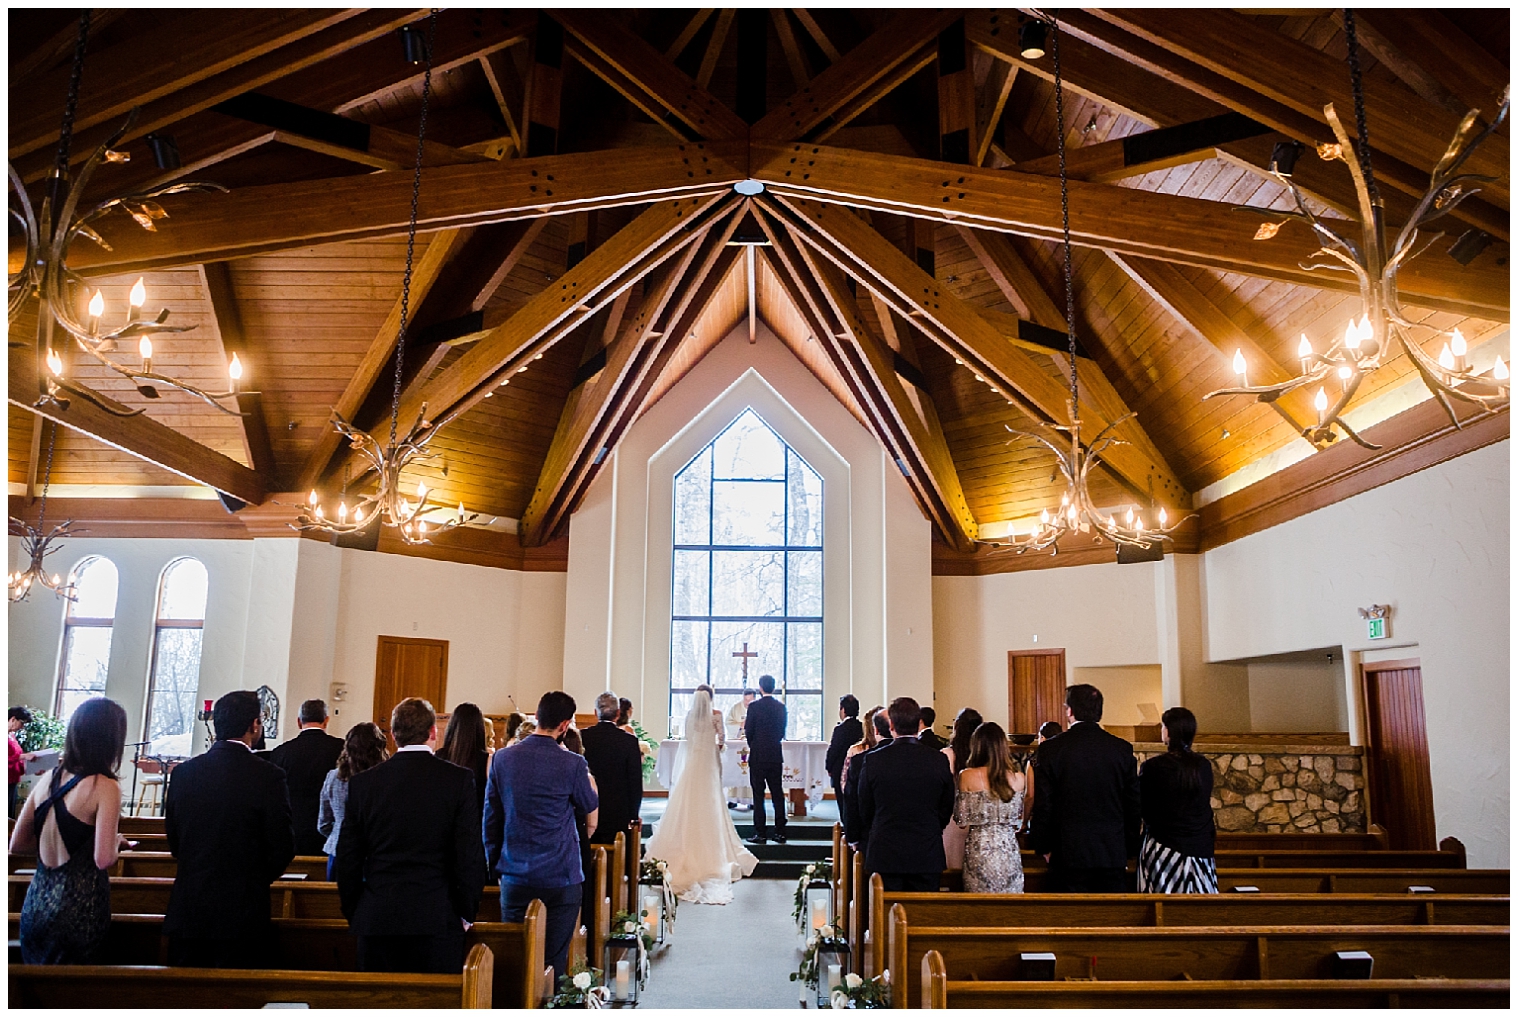 The bride and groom stand together at the altar at their beaver creek chapel church wedding.